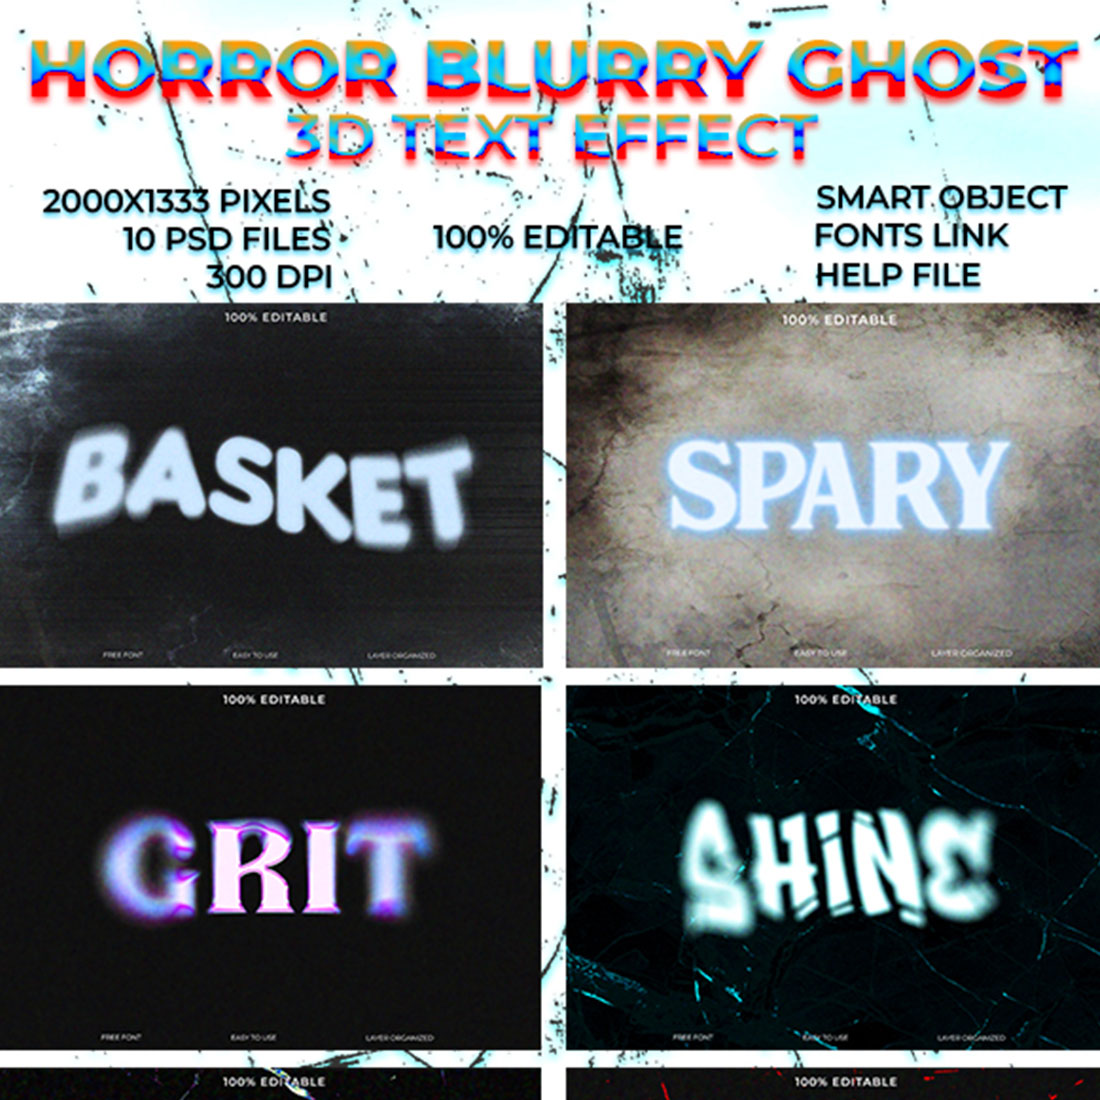 Horror Blurry Ghost Text Effects cover image.